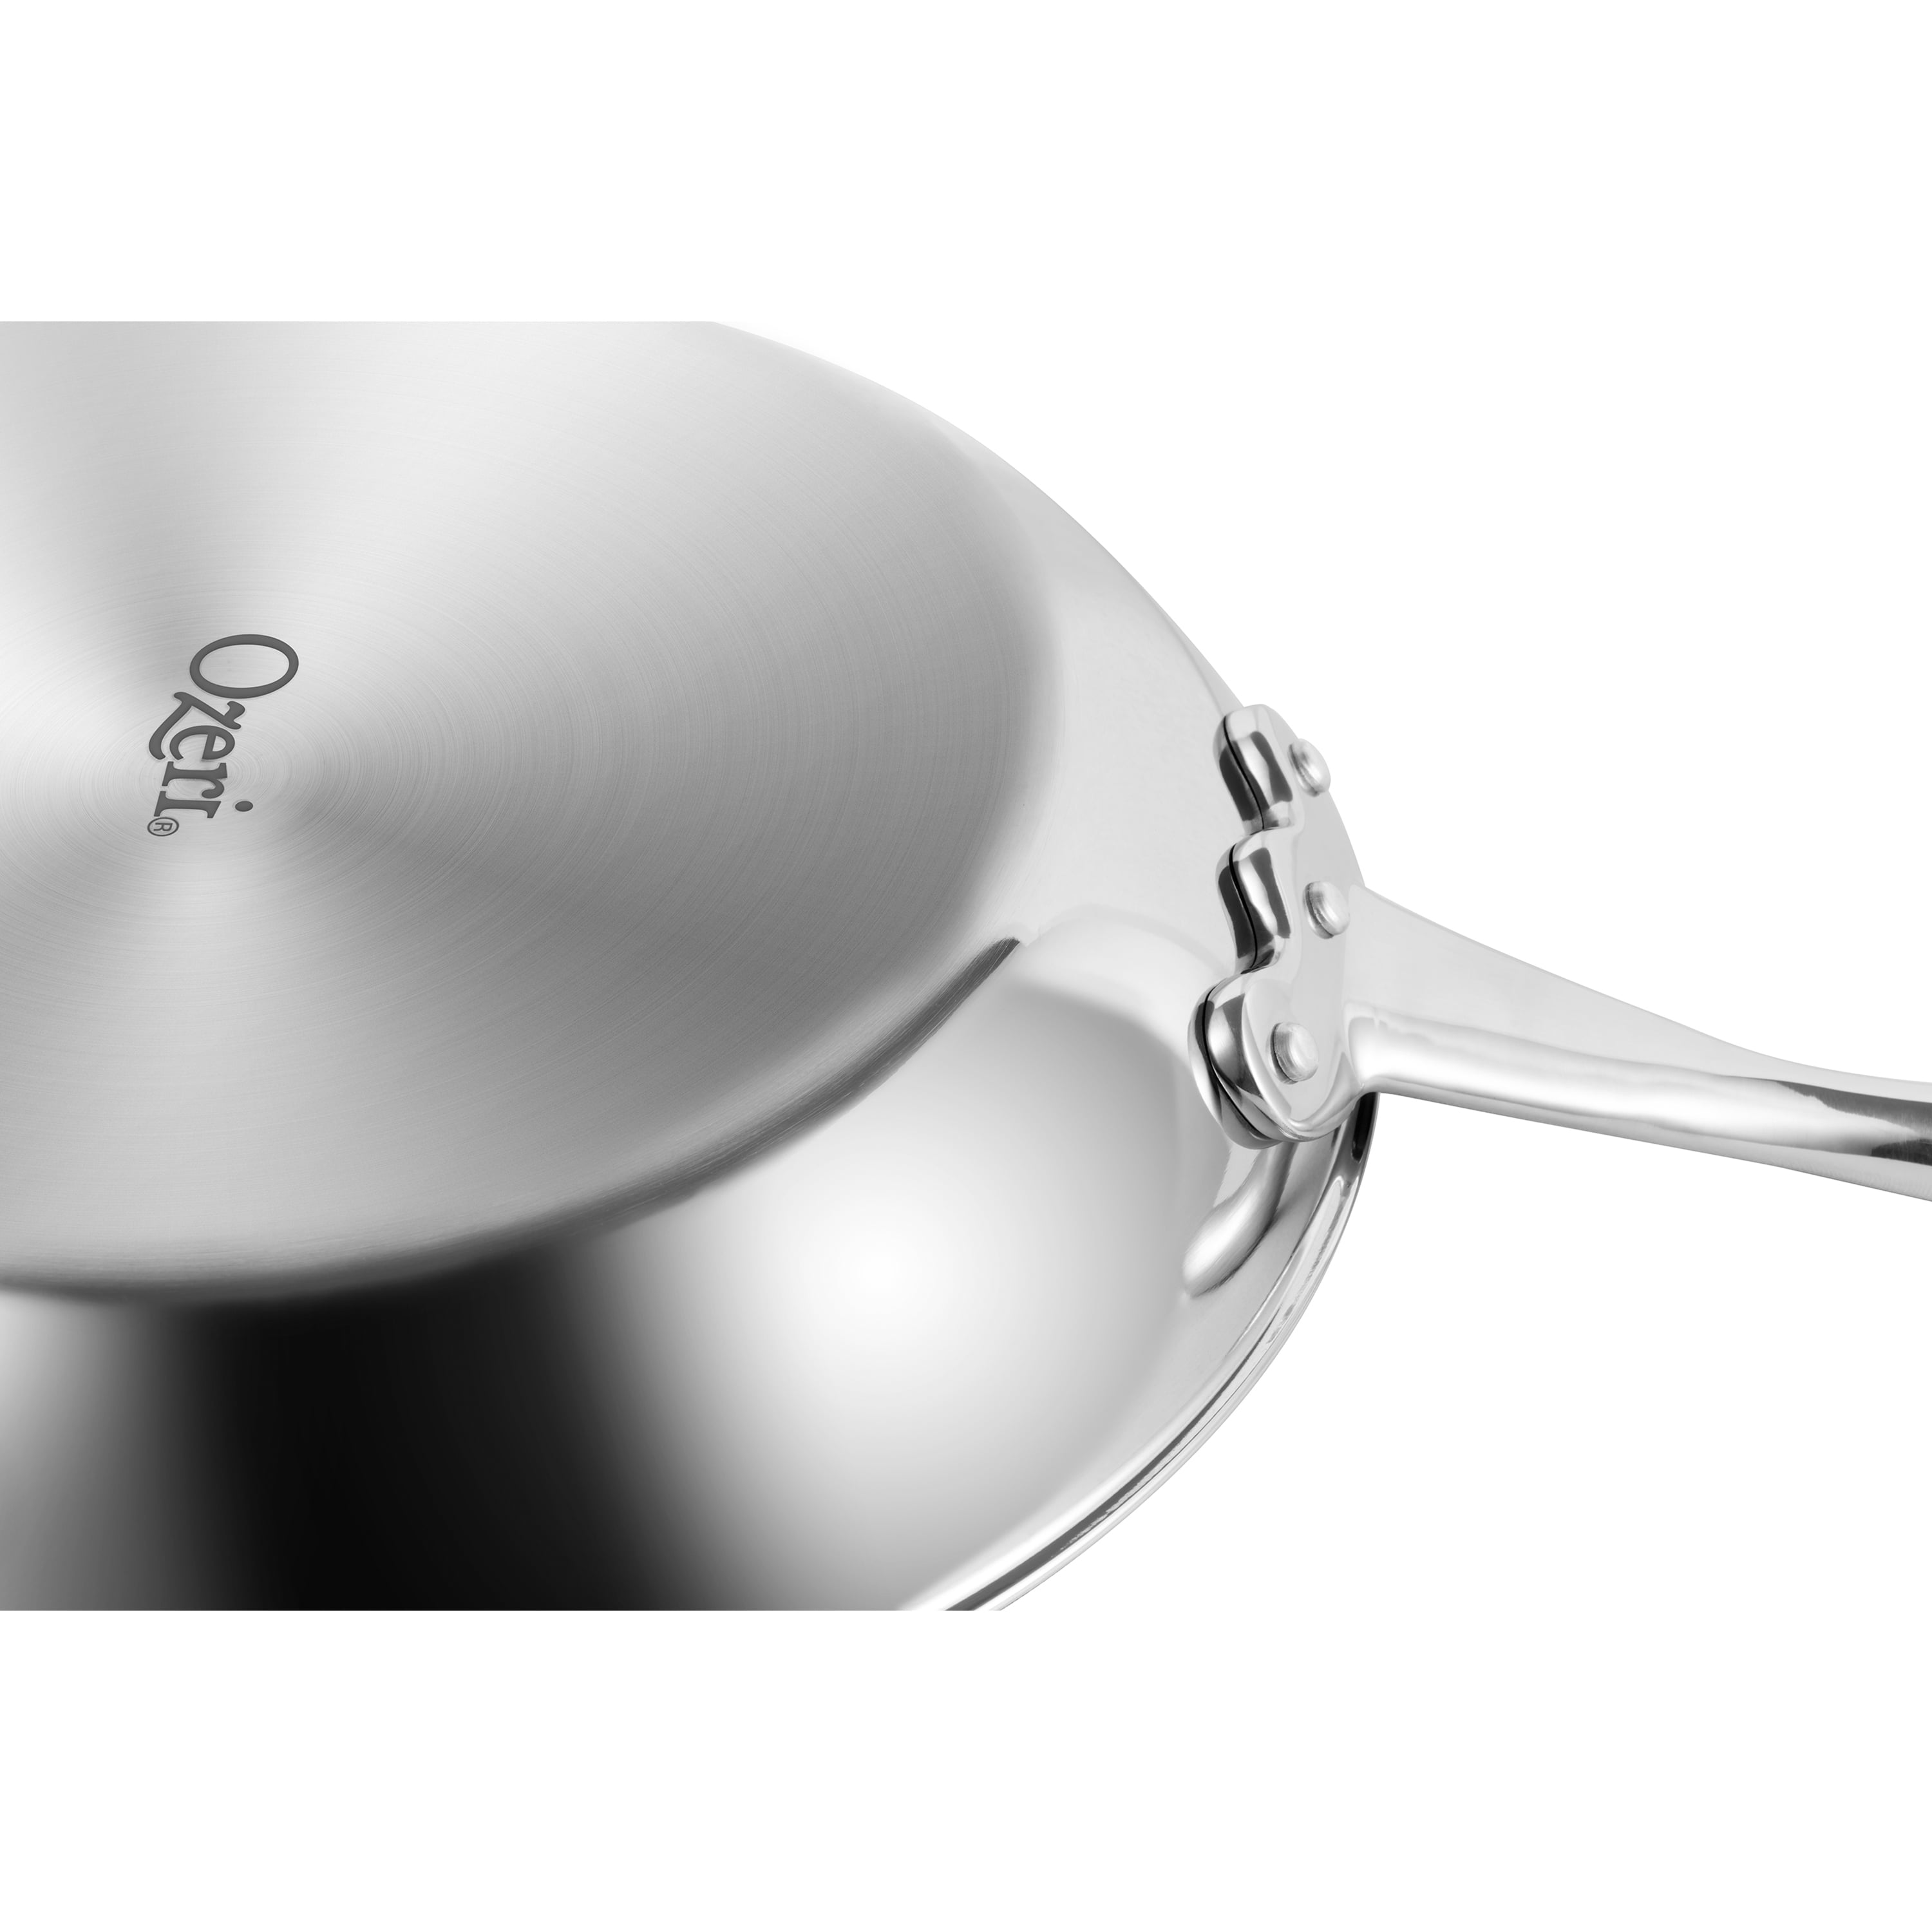 10 Stainless Steel Earth Pan by Ozeri, 100% PTFE-Free Restaurant Edition, 1  - Harris Teeter